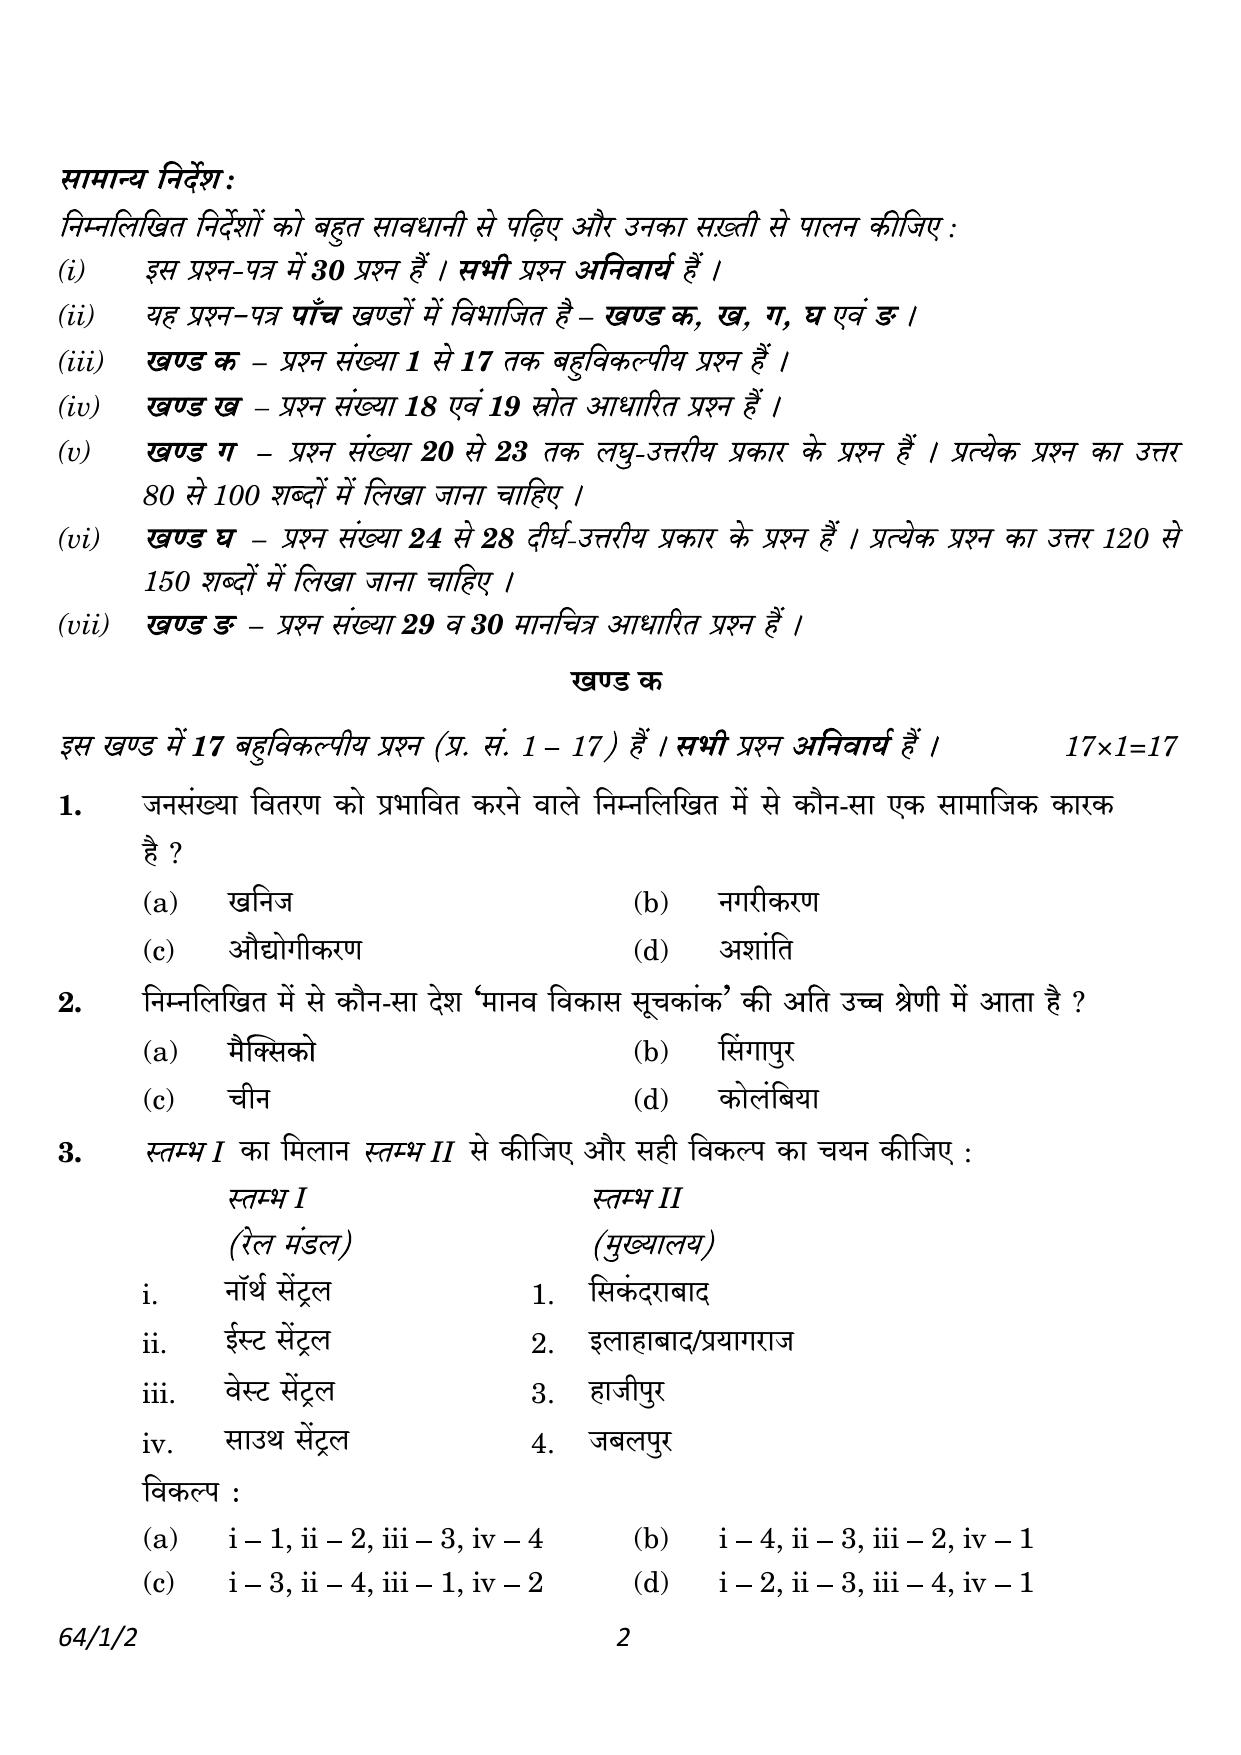 CBSE Class 12 64-1-2 Geography 2023 Question Paper - Page 2